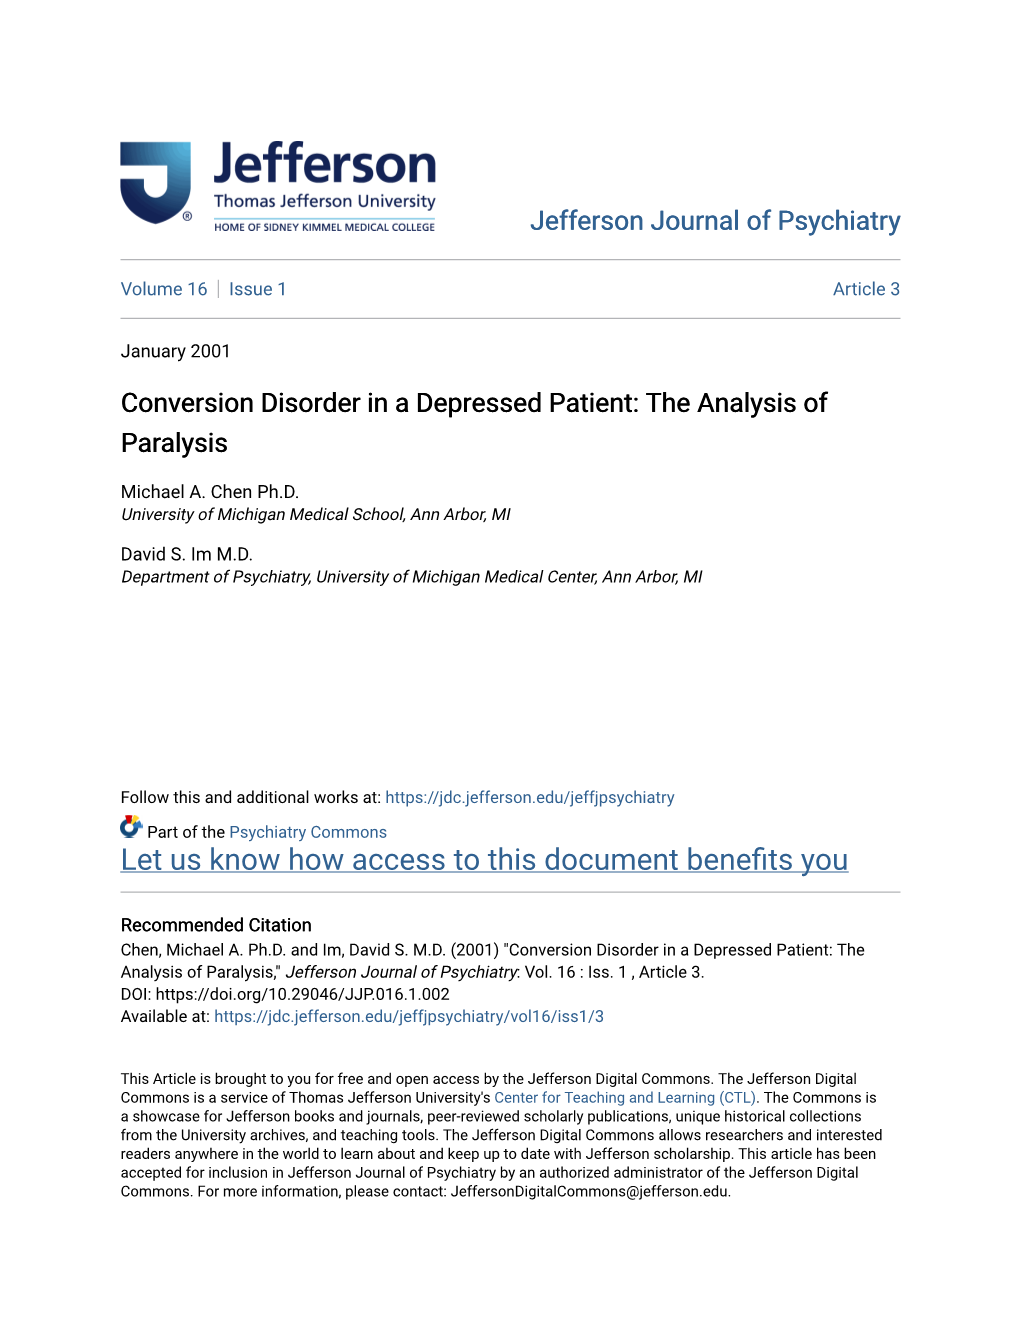 Conversion Disorder in a Depressed Patient: the Analysis of Paralysis